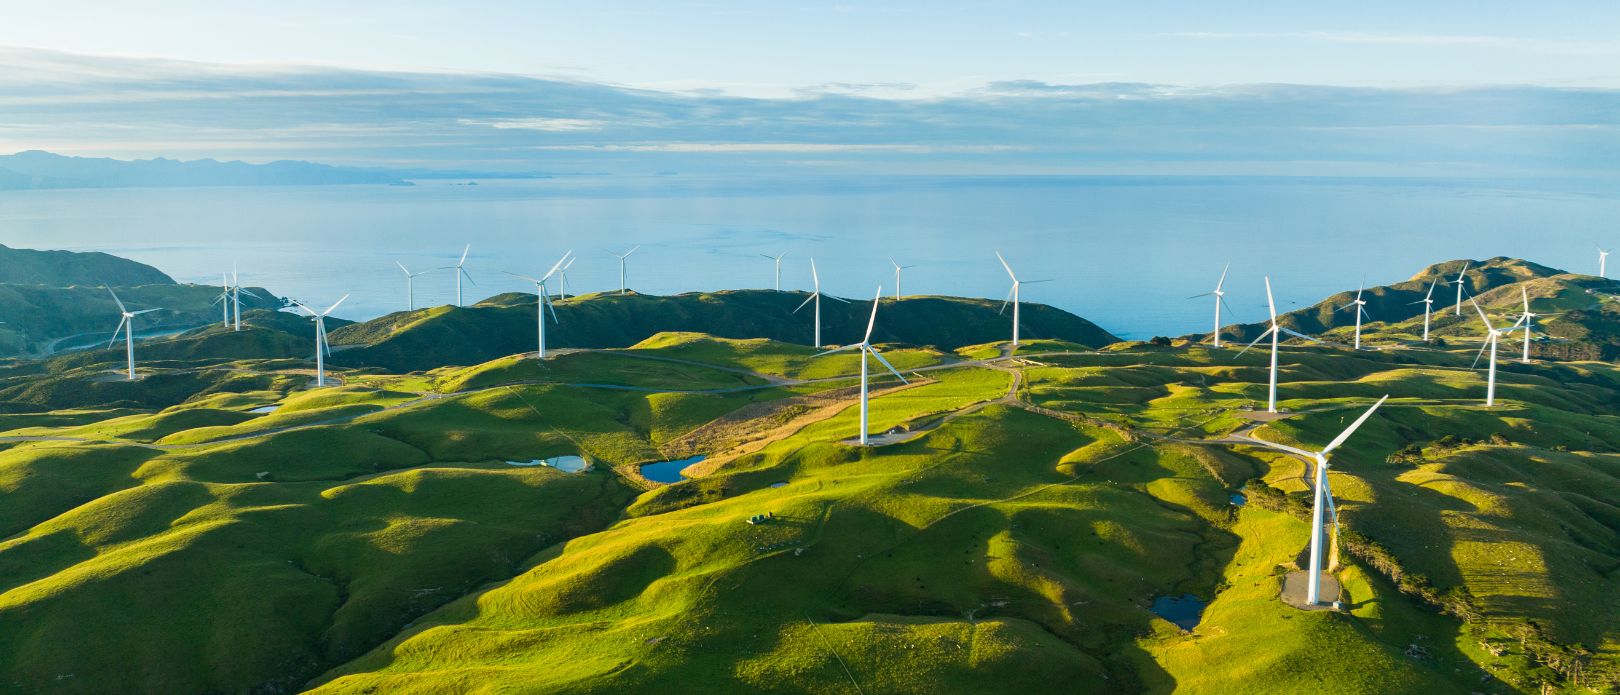 Wind turbines on a green landscape with the ocean in the background.